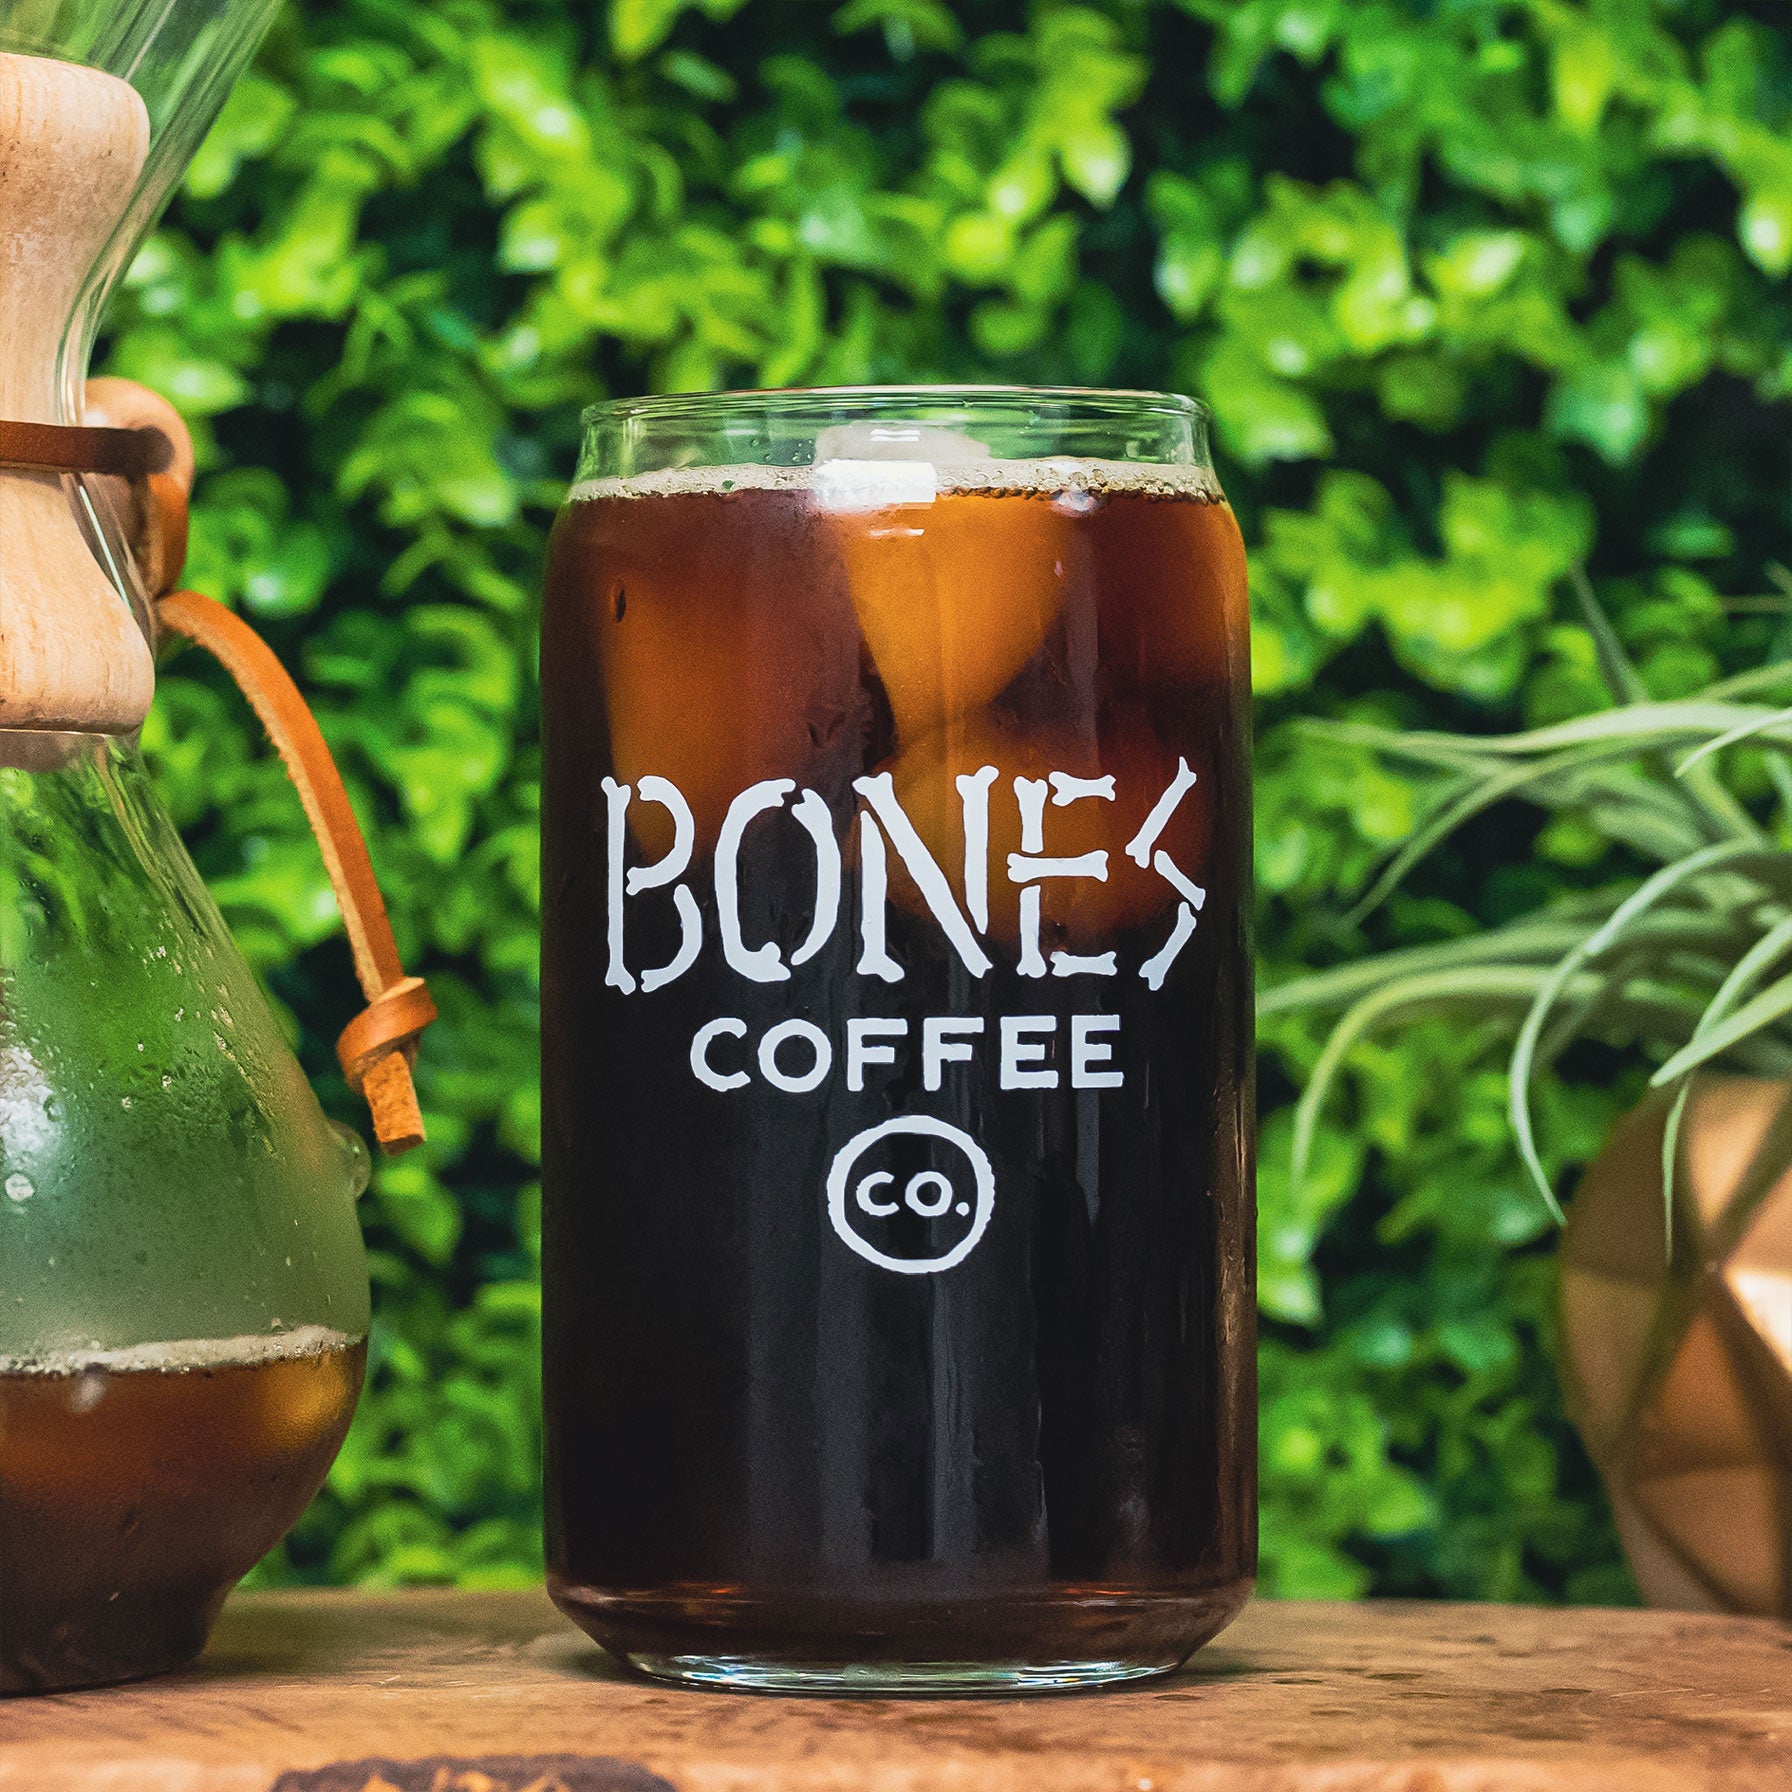 Cold Brew 16oz Glass Cup (more colors available)